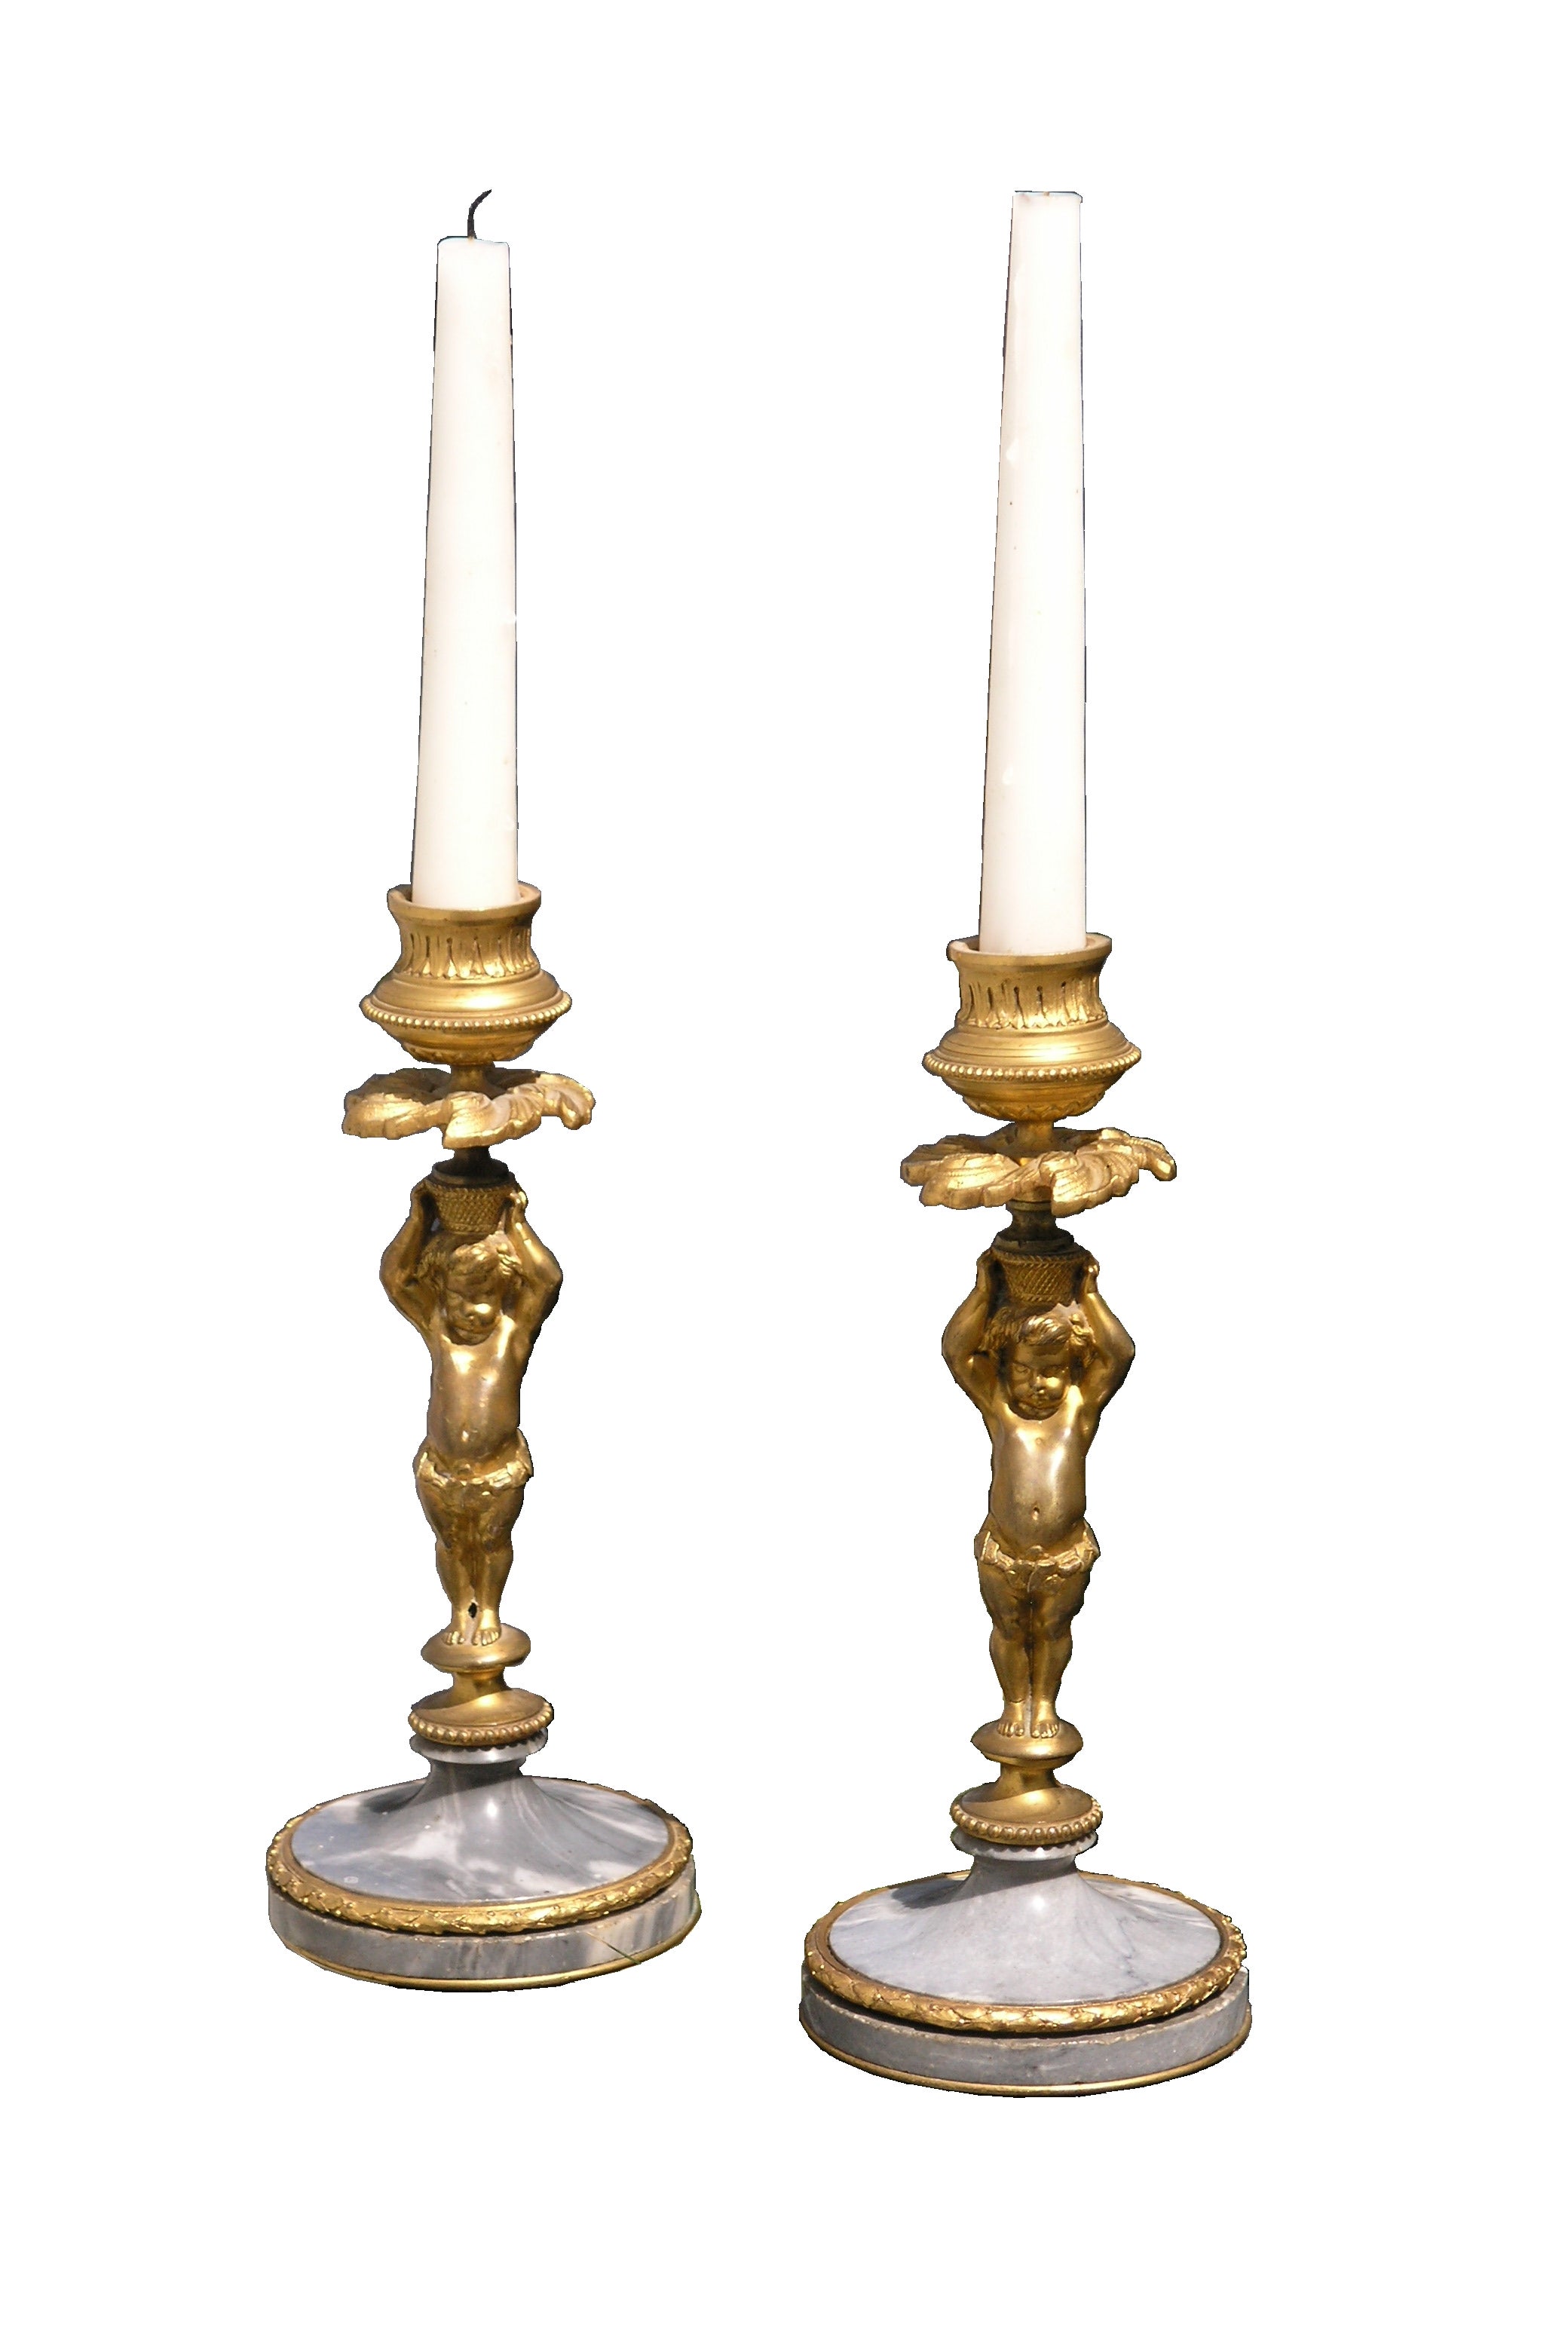 Pair of 19th Century French Gilt Bronze Candelabra For Sale